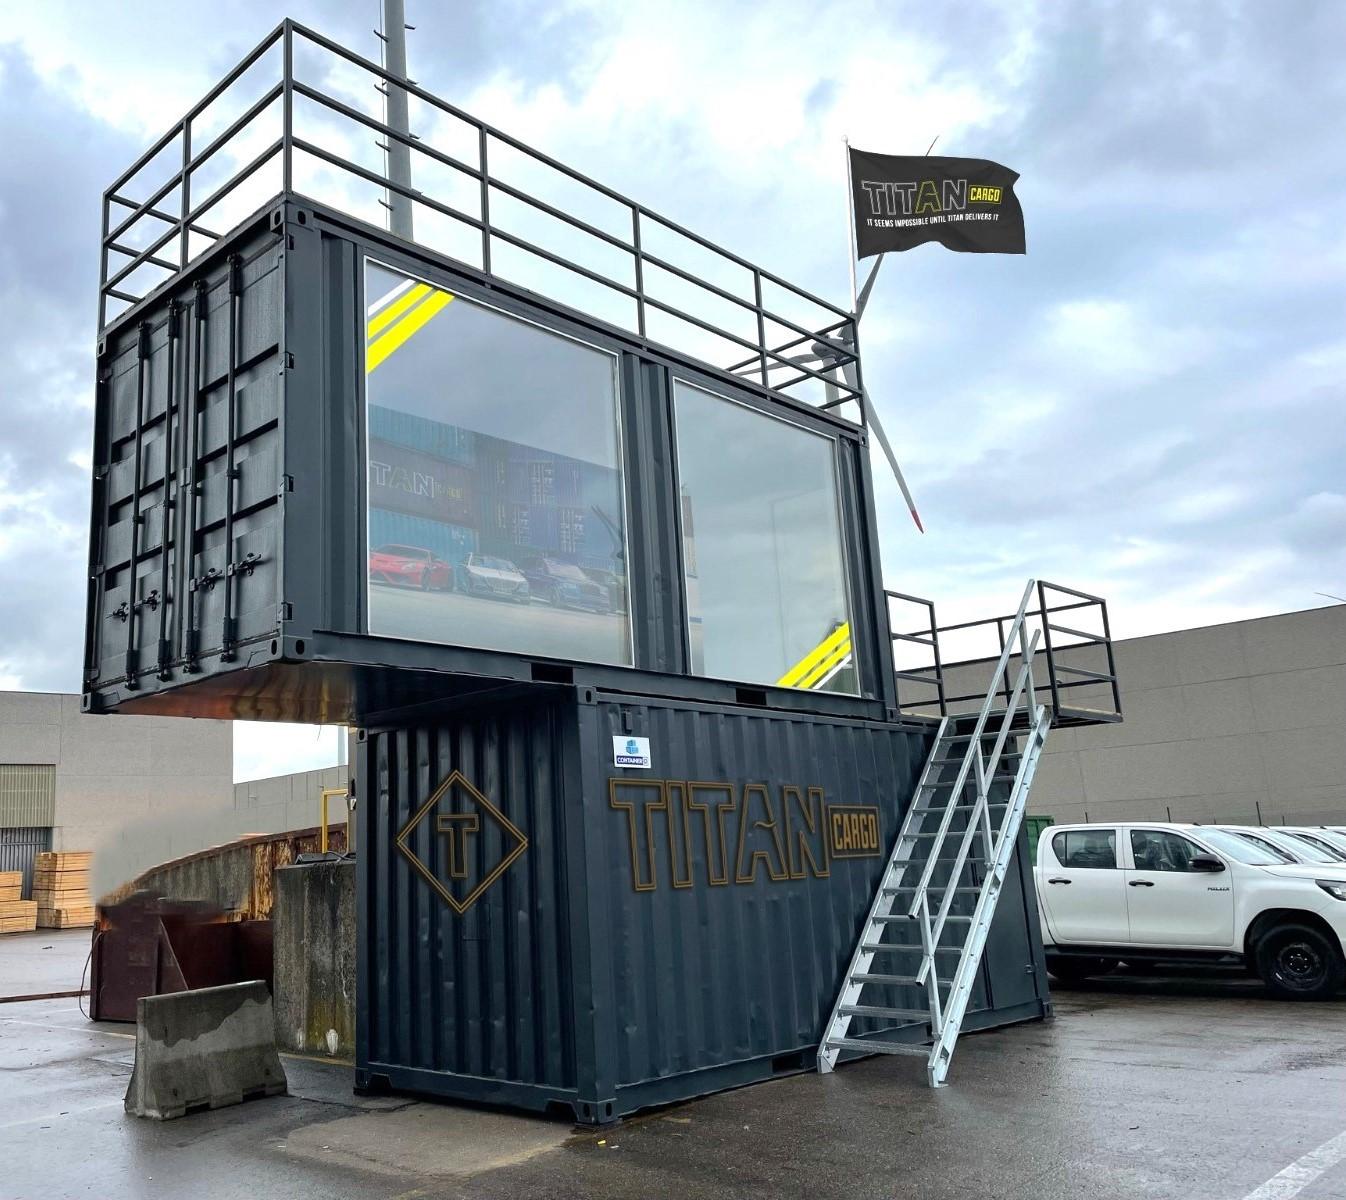 Two 20 foot black Custom industrial container solution with large windows for any business. Mobile work space / office for sale or rent